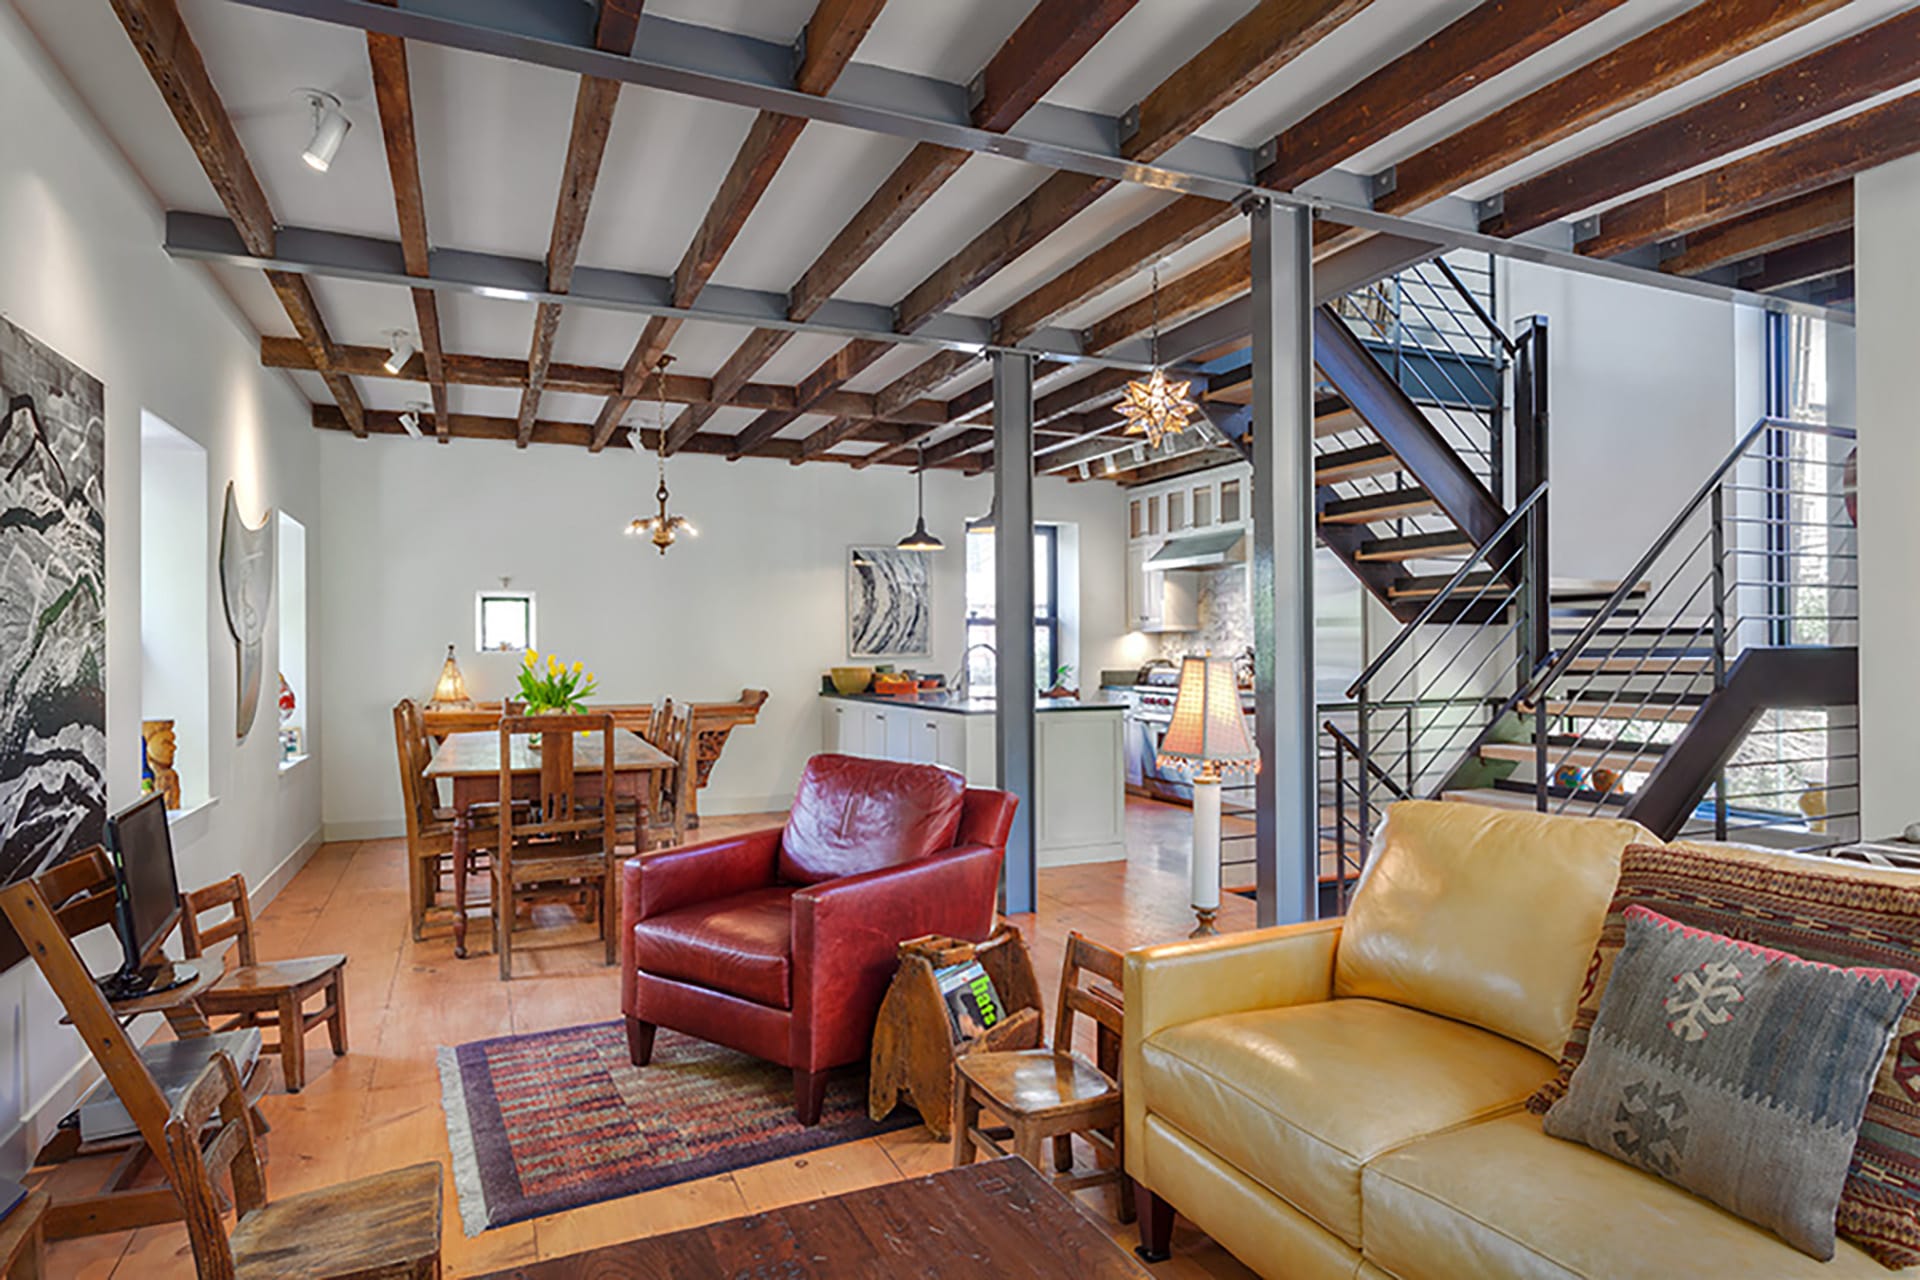 Living space with exposed ceiling beams, a yellow leather couch and red leather armchair, dining area, and modern metal staircase in a Cobble Hill carriage house